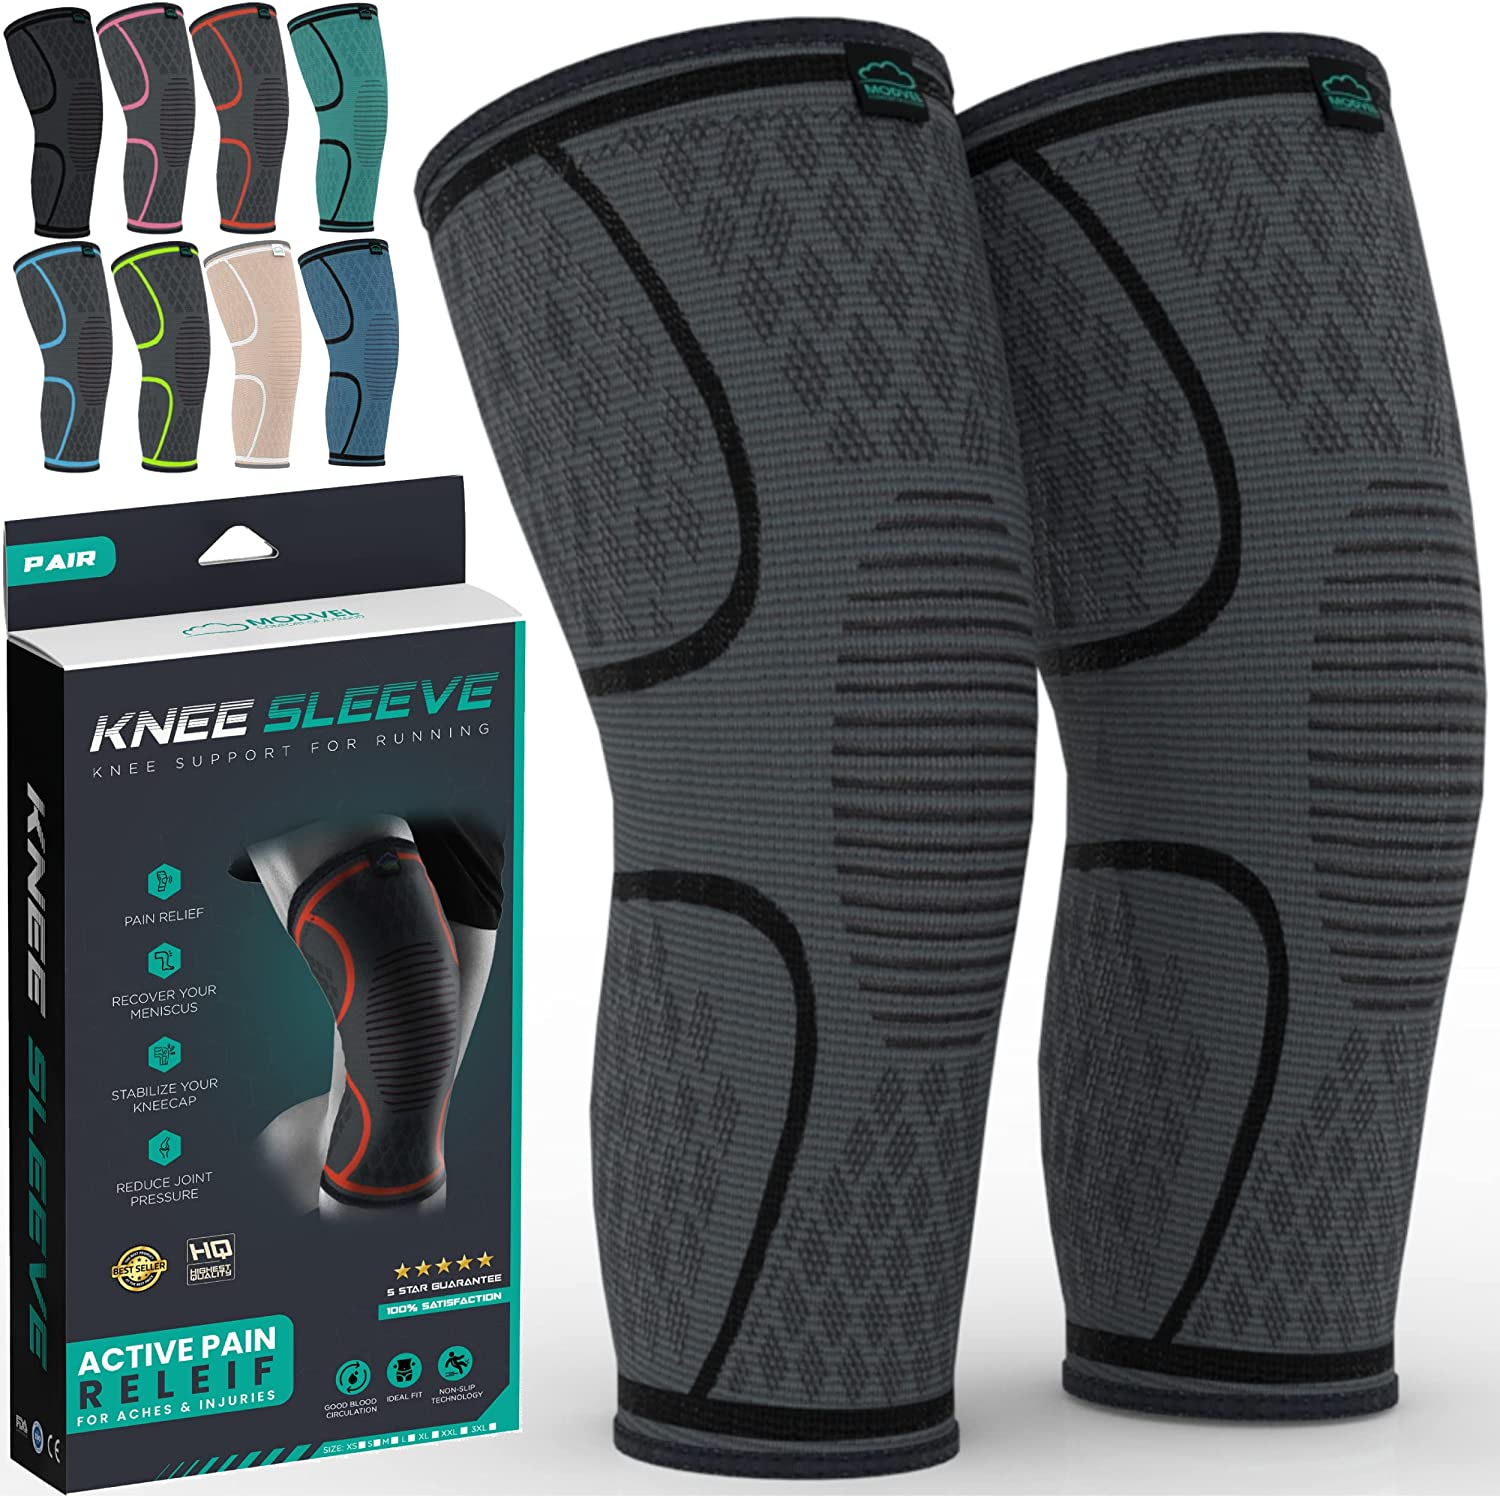 2 Pack Knee Brace | Knee Compression Sleeve for Men & Women | Knee Support for Running | Medical Grade Knee Pads for Meniscus Tear, ACL, Arthritis, Joint Pain Relief.